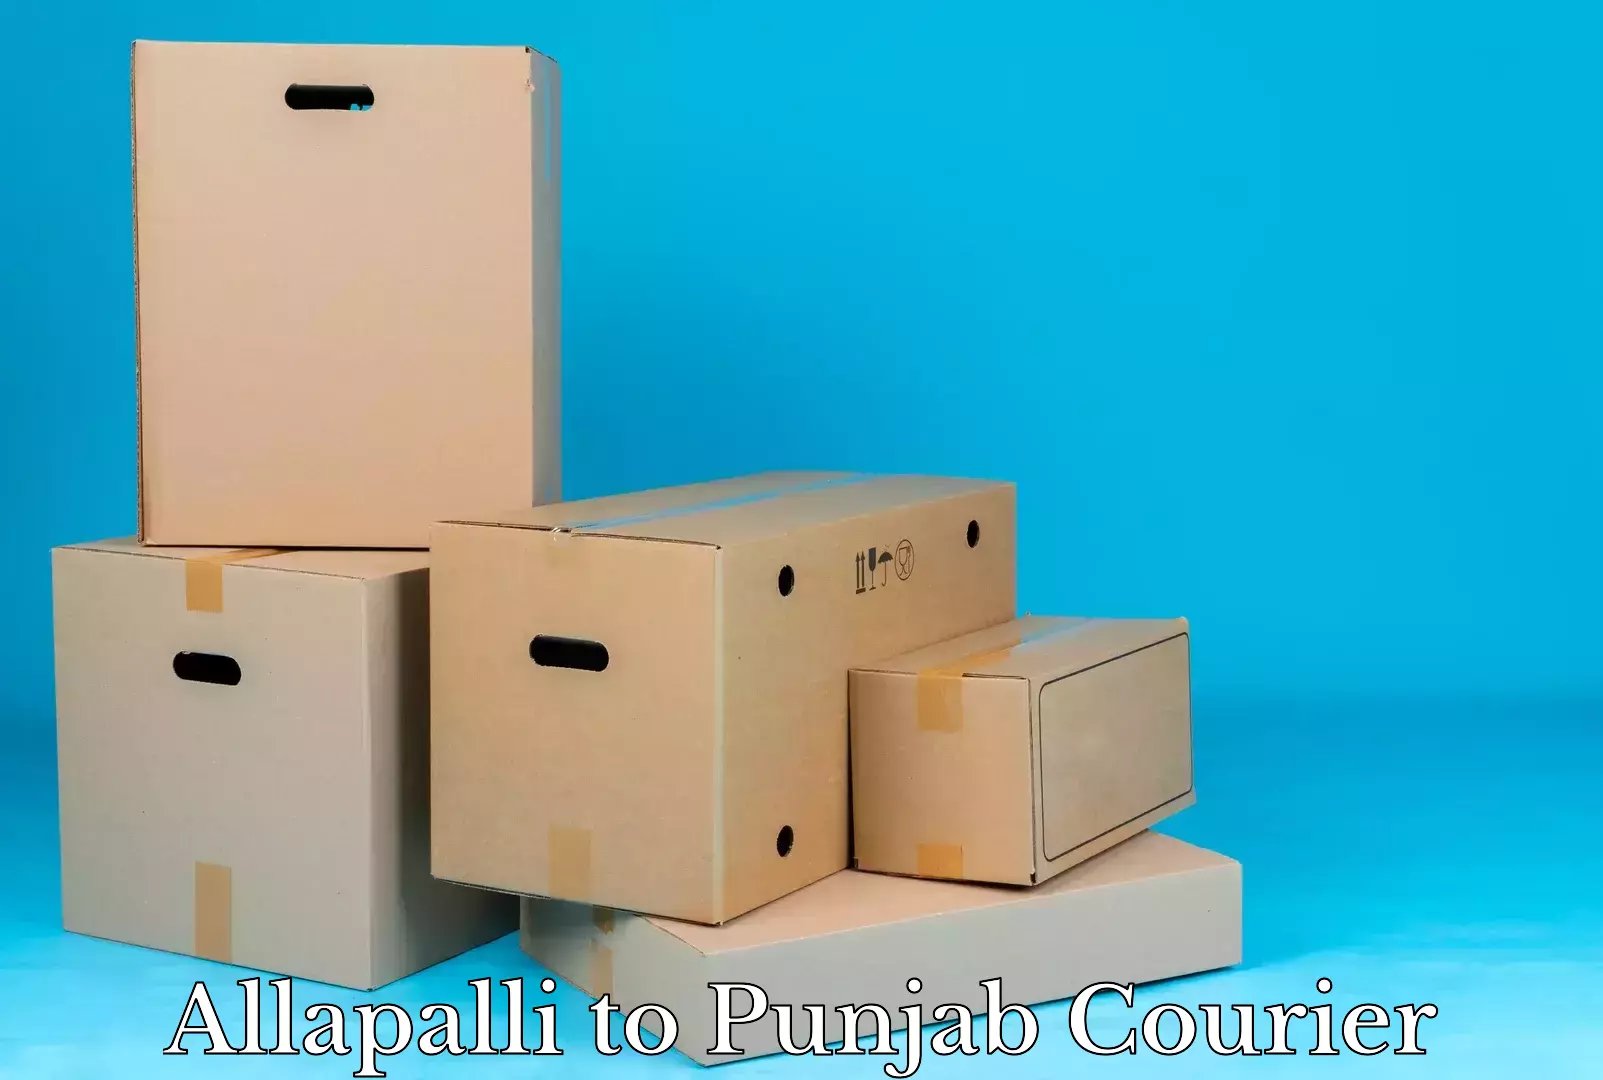 Furniture moving specialists Allapalli to Punjab